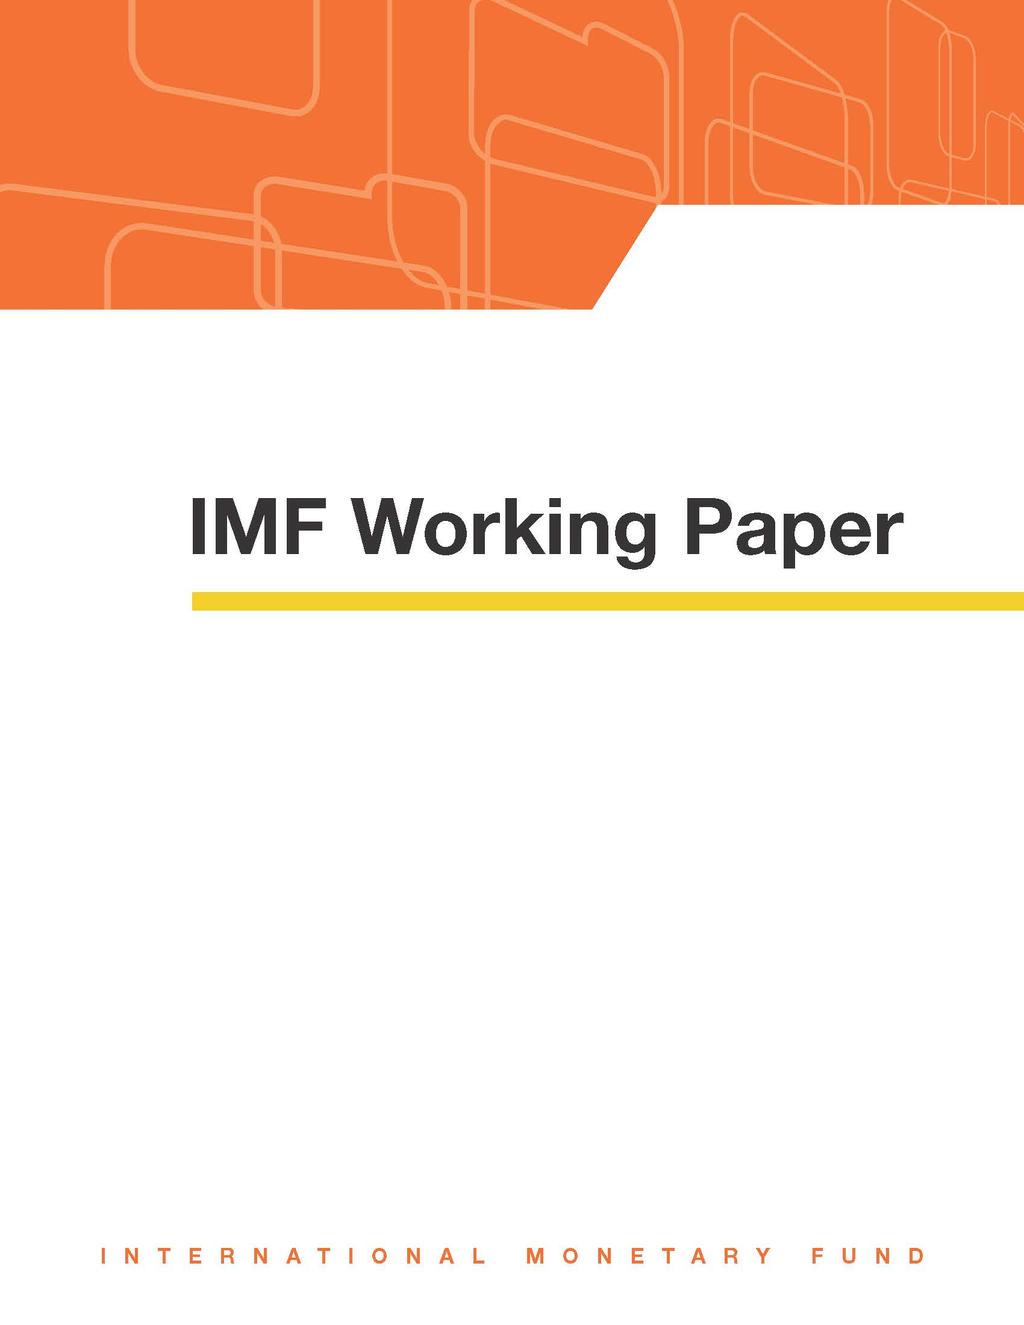 WP/15/241 Spillovers from Global and Regional Shocks to Armenia by Knarik Ayvazyan and Teresa Dabán IMF Working Papers describe research in progress by the author(s) and are published to elicit